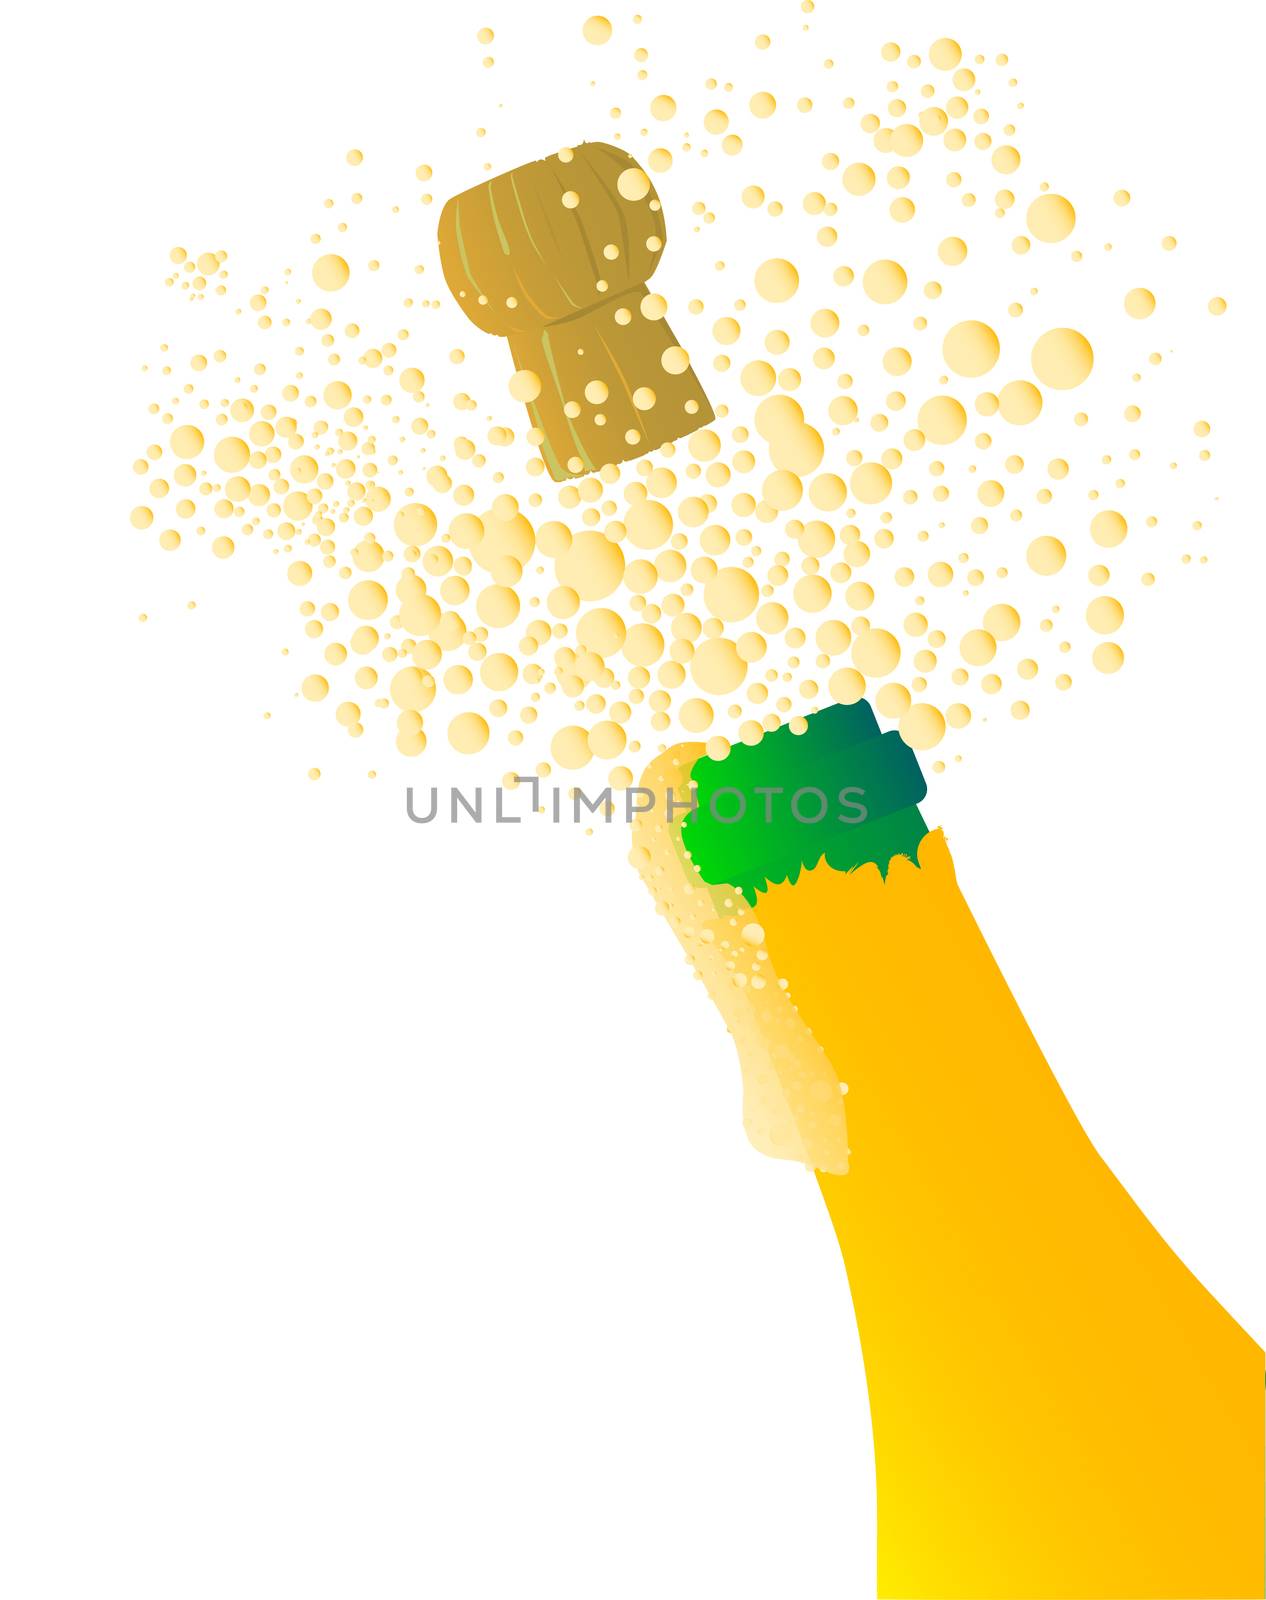 Champagne bottle being opened with froth and bubbles over a white background